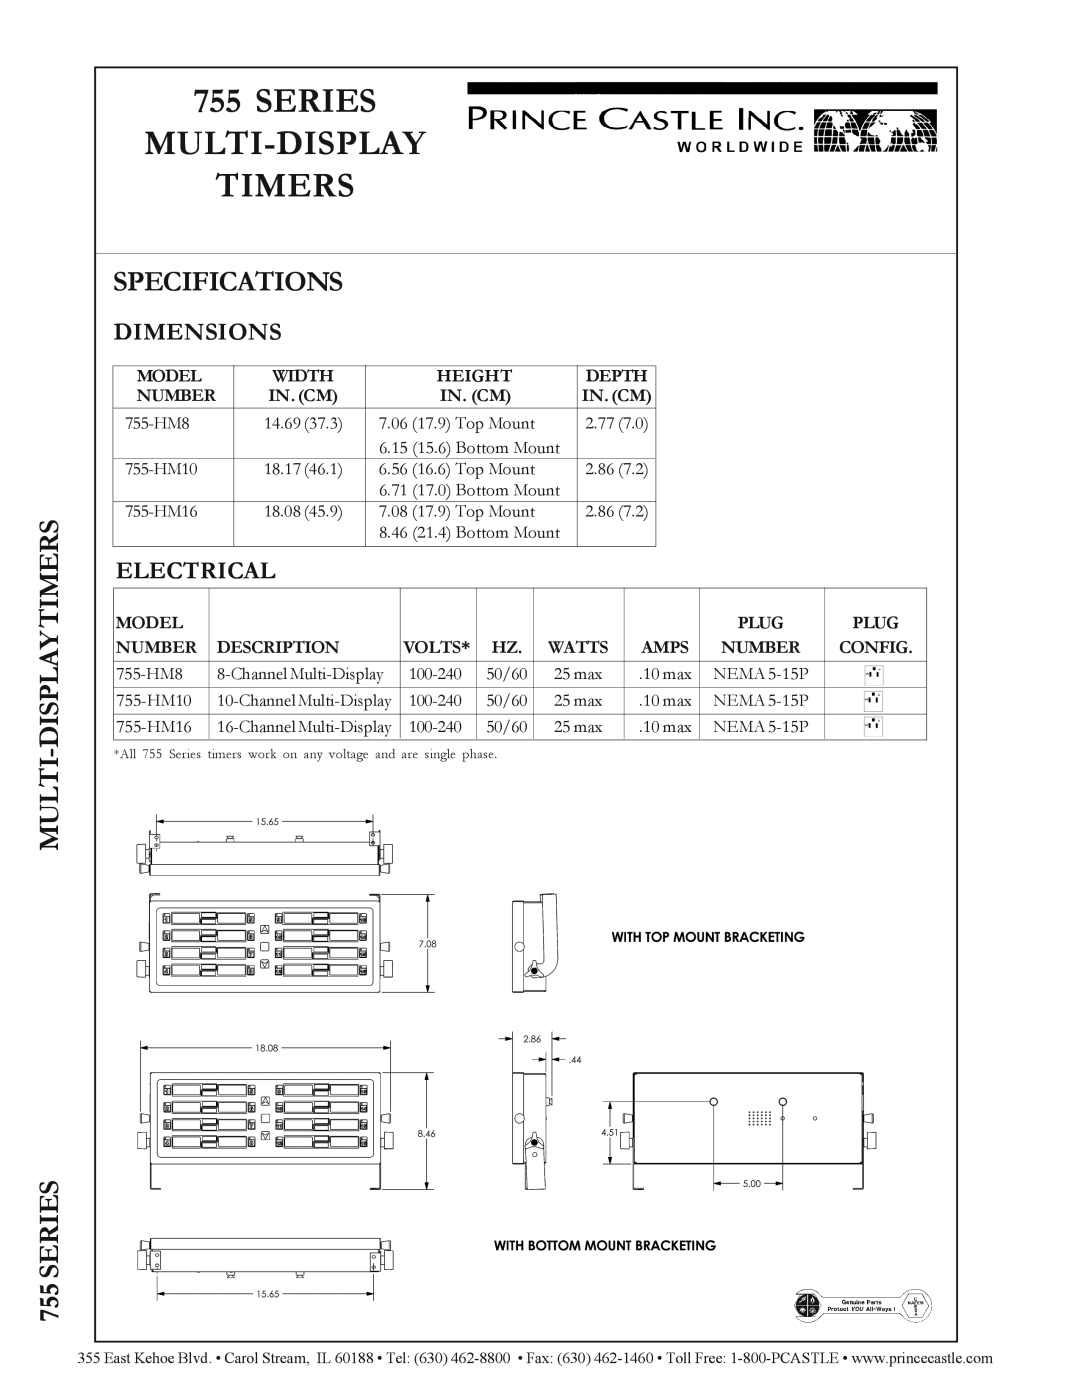 Prince Castle 755-HM8 755SERIES MULTI-DISPLAY TIMERS, MULTI-DISPLAYTIMERS 755 SERIES, Specifications, Dimensions, Model 